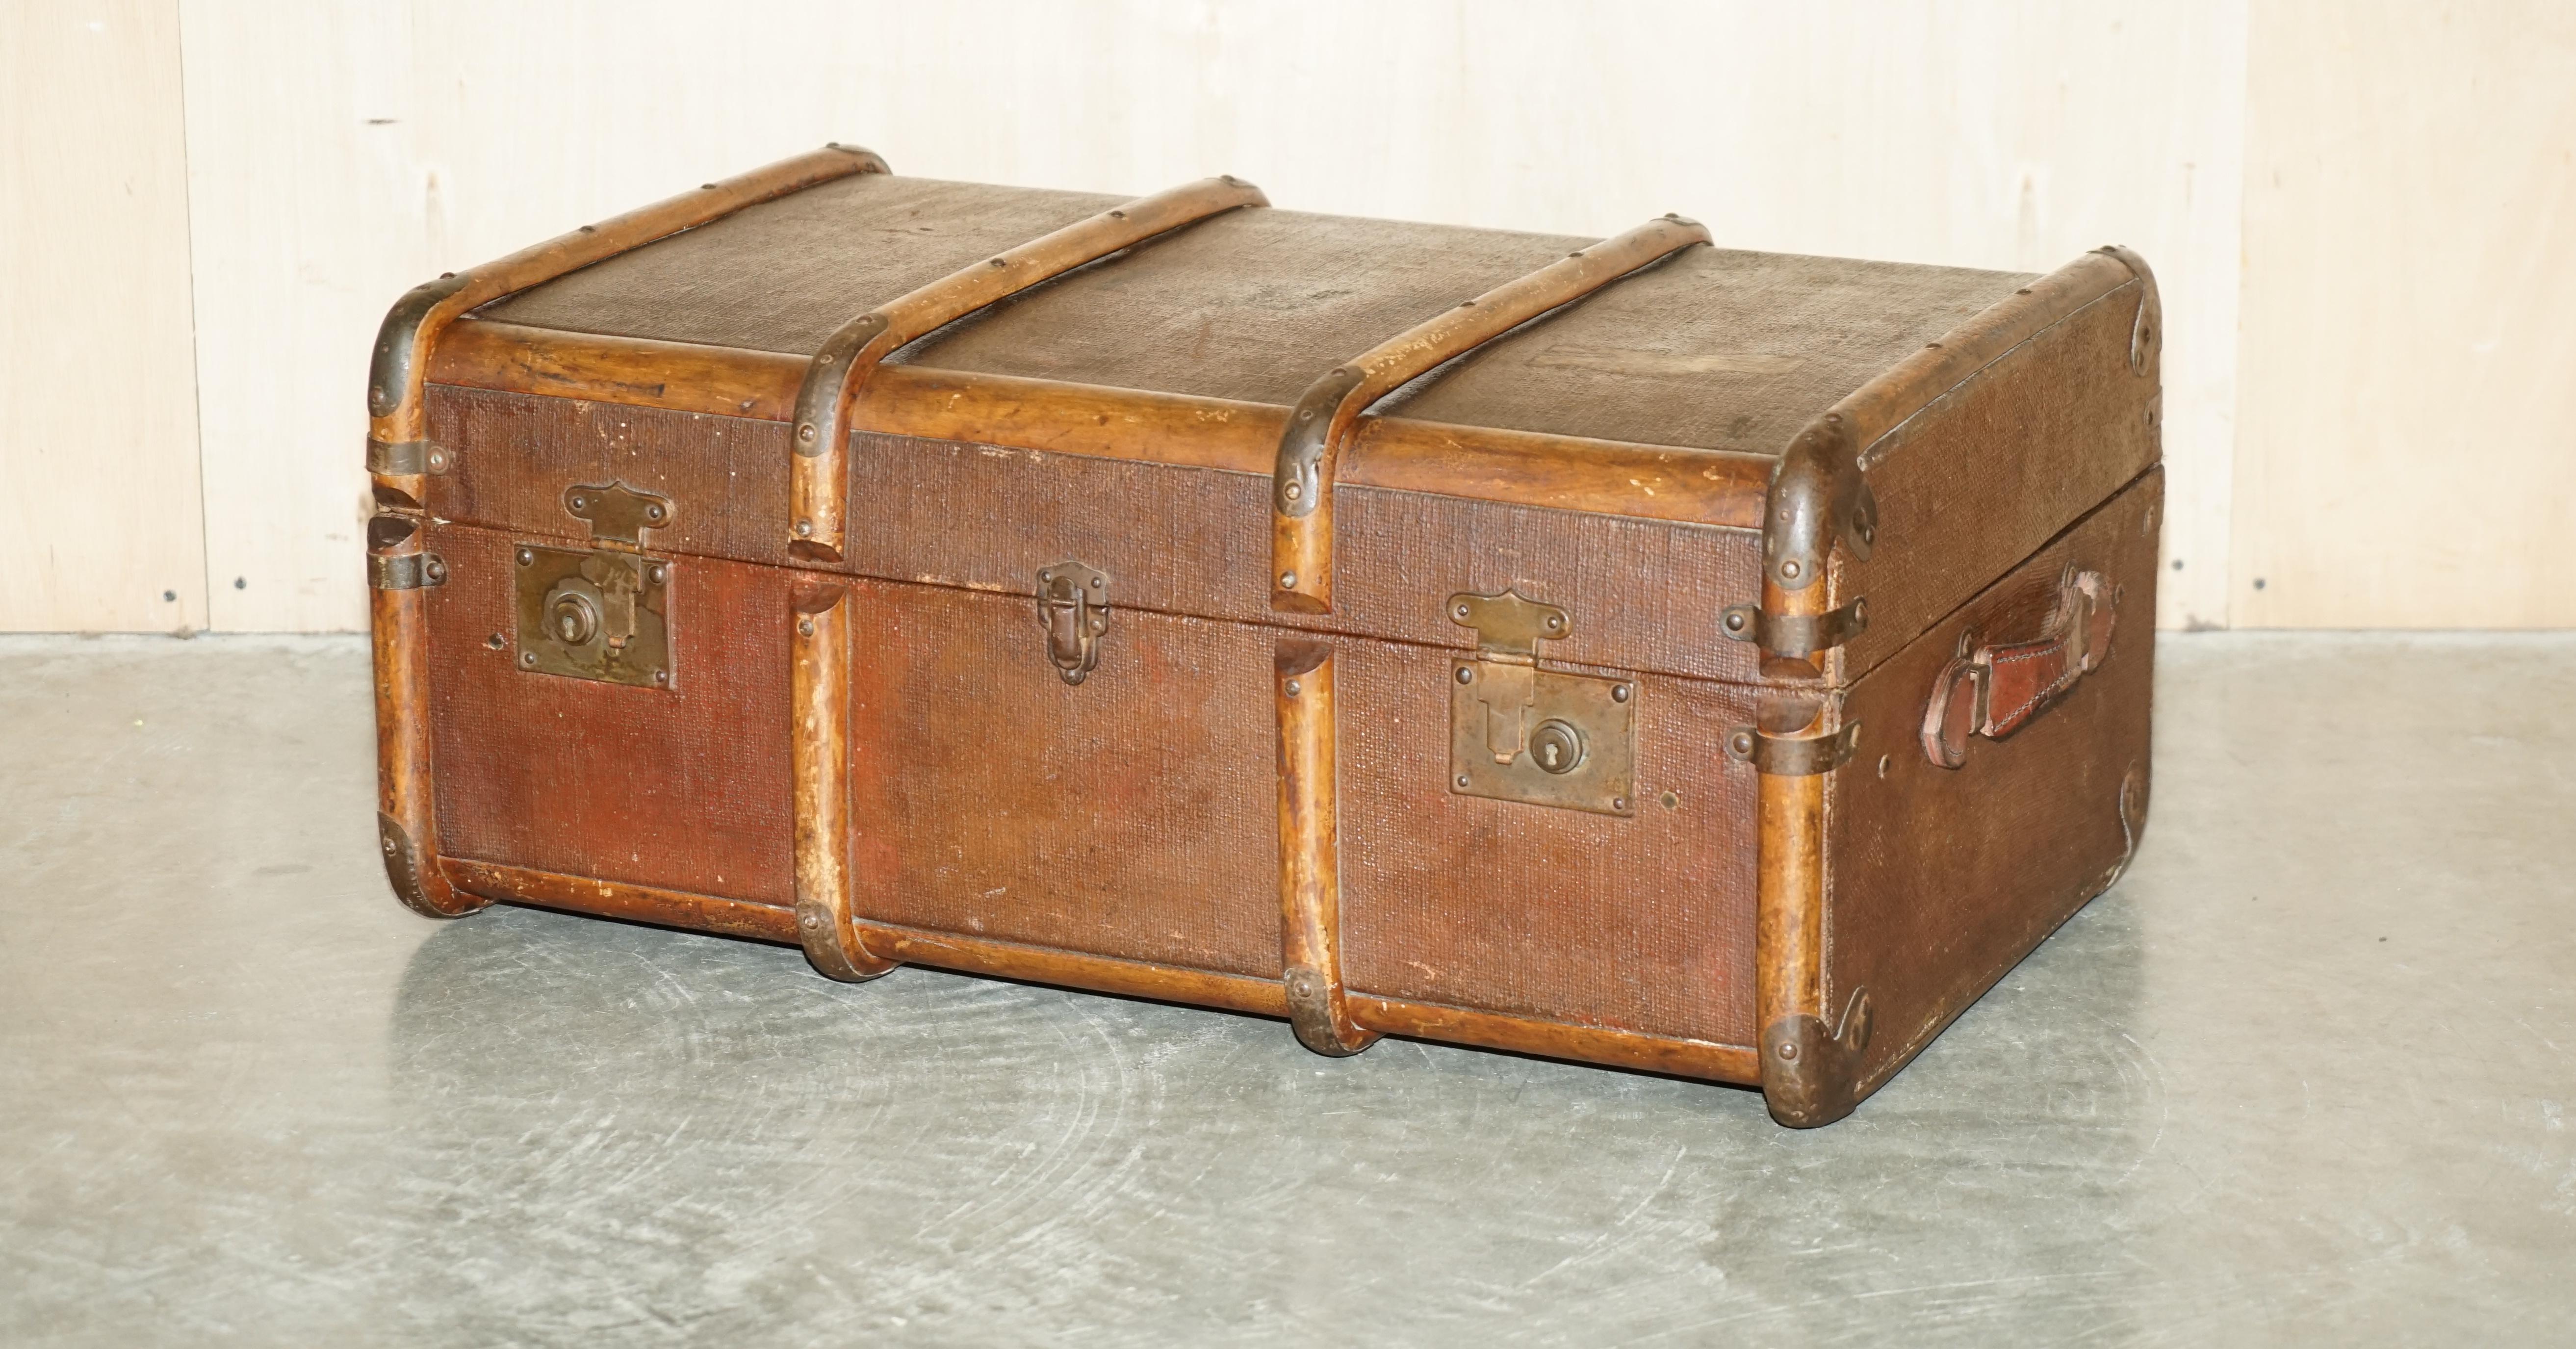 We are delighted to offer for sale this original circa 1880 English Elm strapped with Wrought Iron rivets, leather handled, canvas steamer trunk 

This is a very well made example of a steamer trunk designed for luxury travel on cruise liner